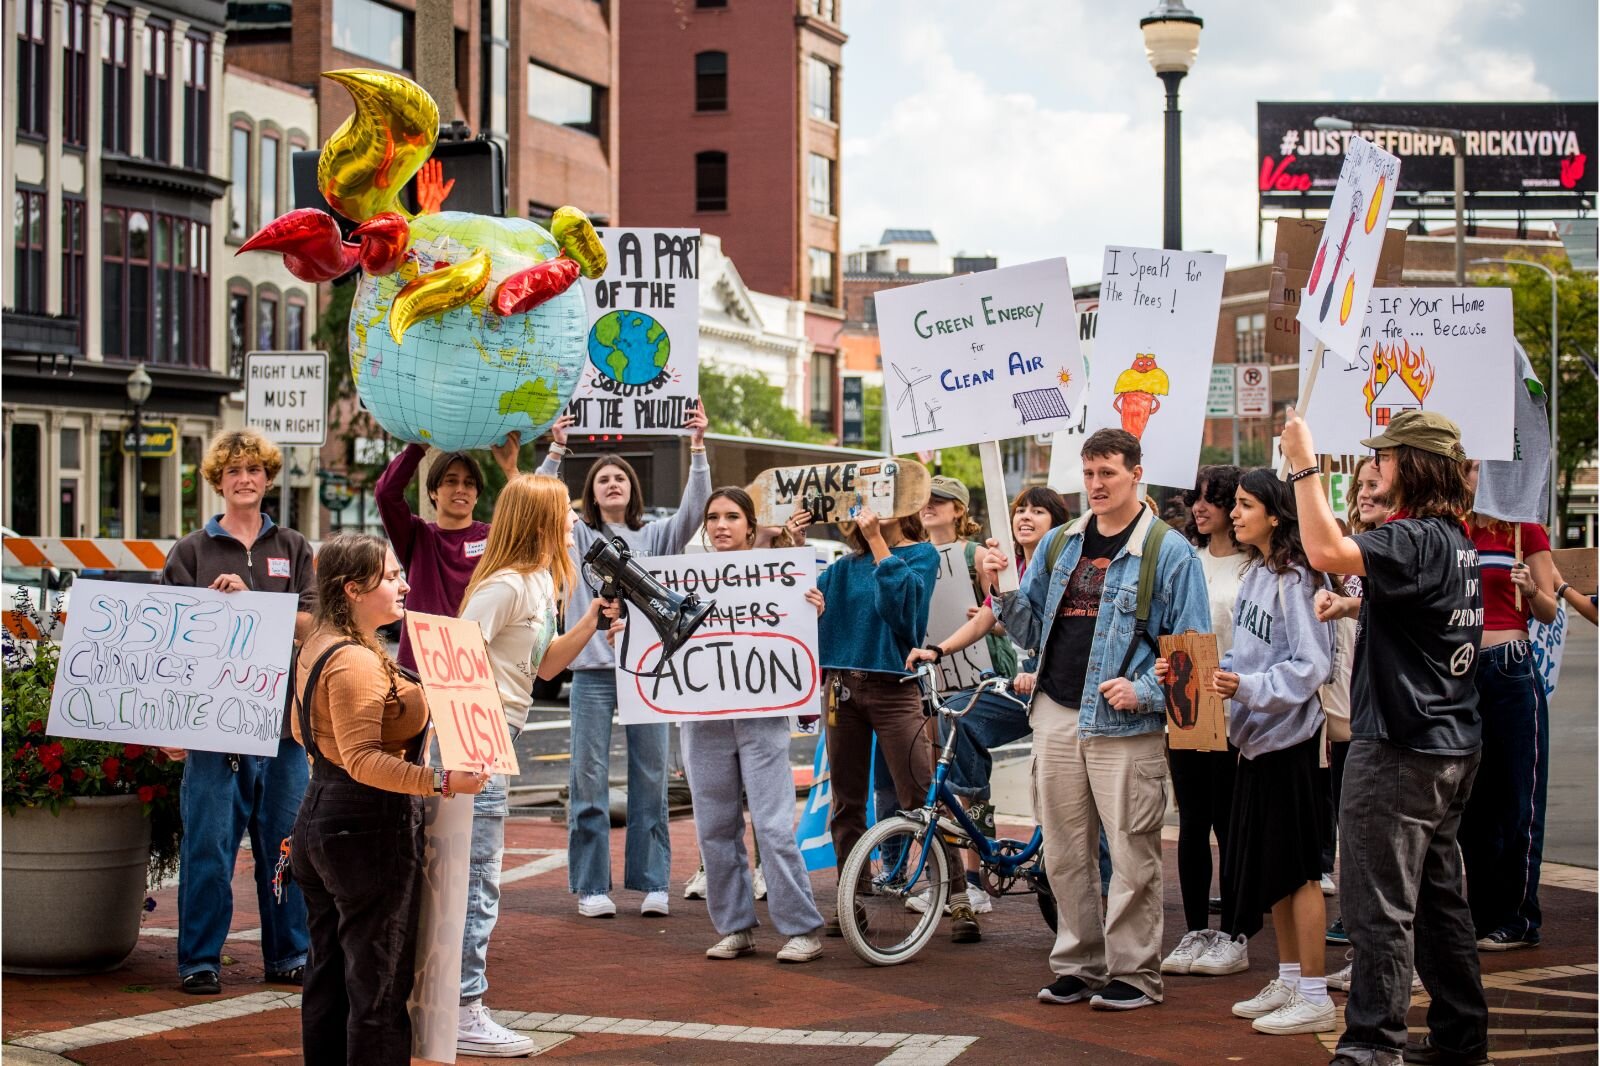 Students marched through downtown Kalamazoo last Friday as part of the Youth Climate Strike.